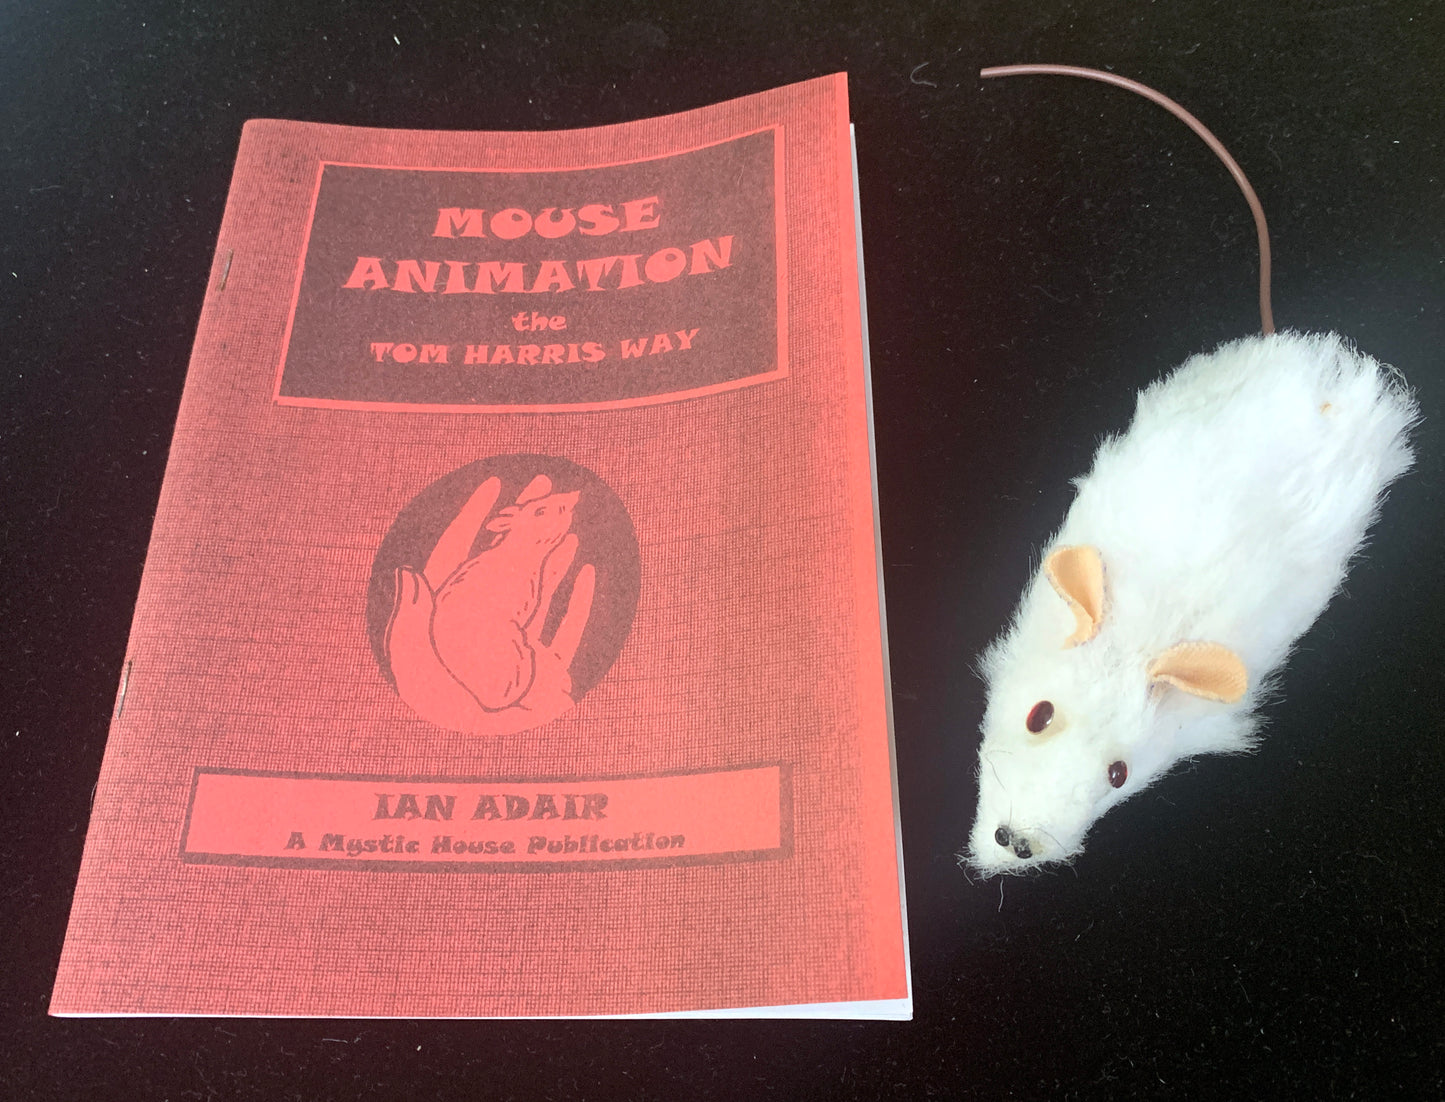 Adair’s Mouse Animation